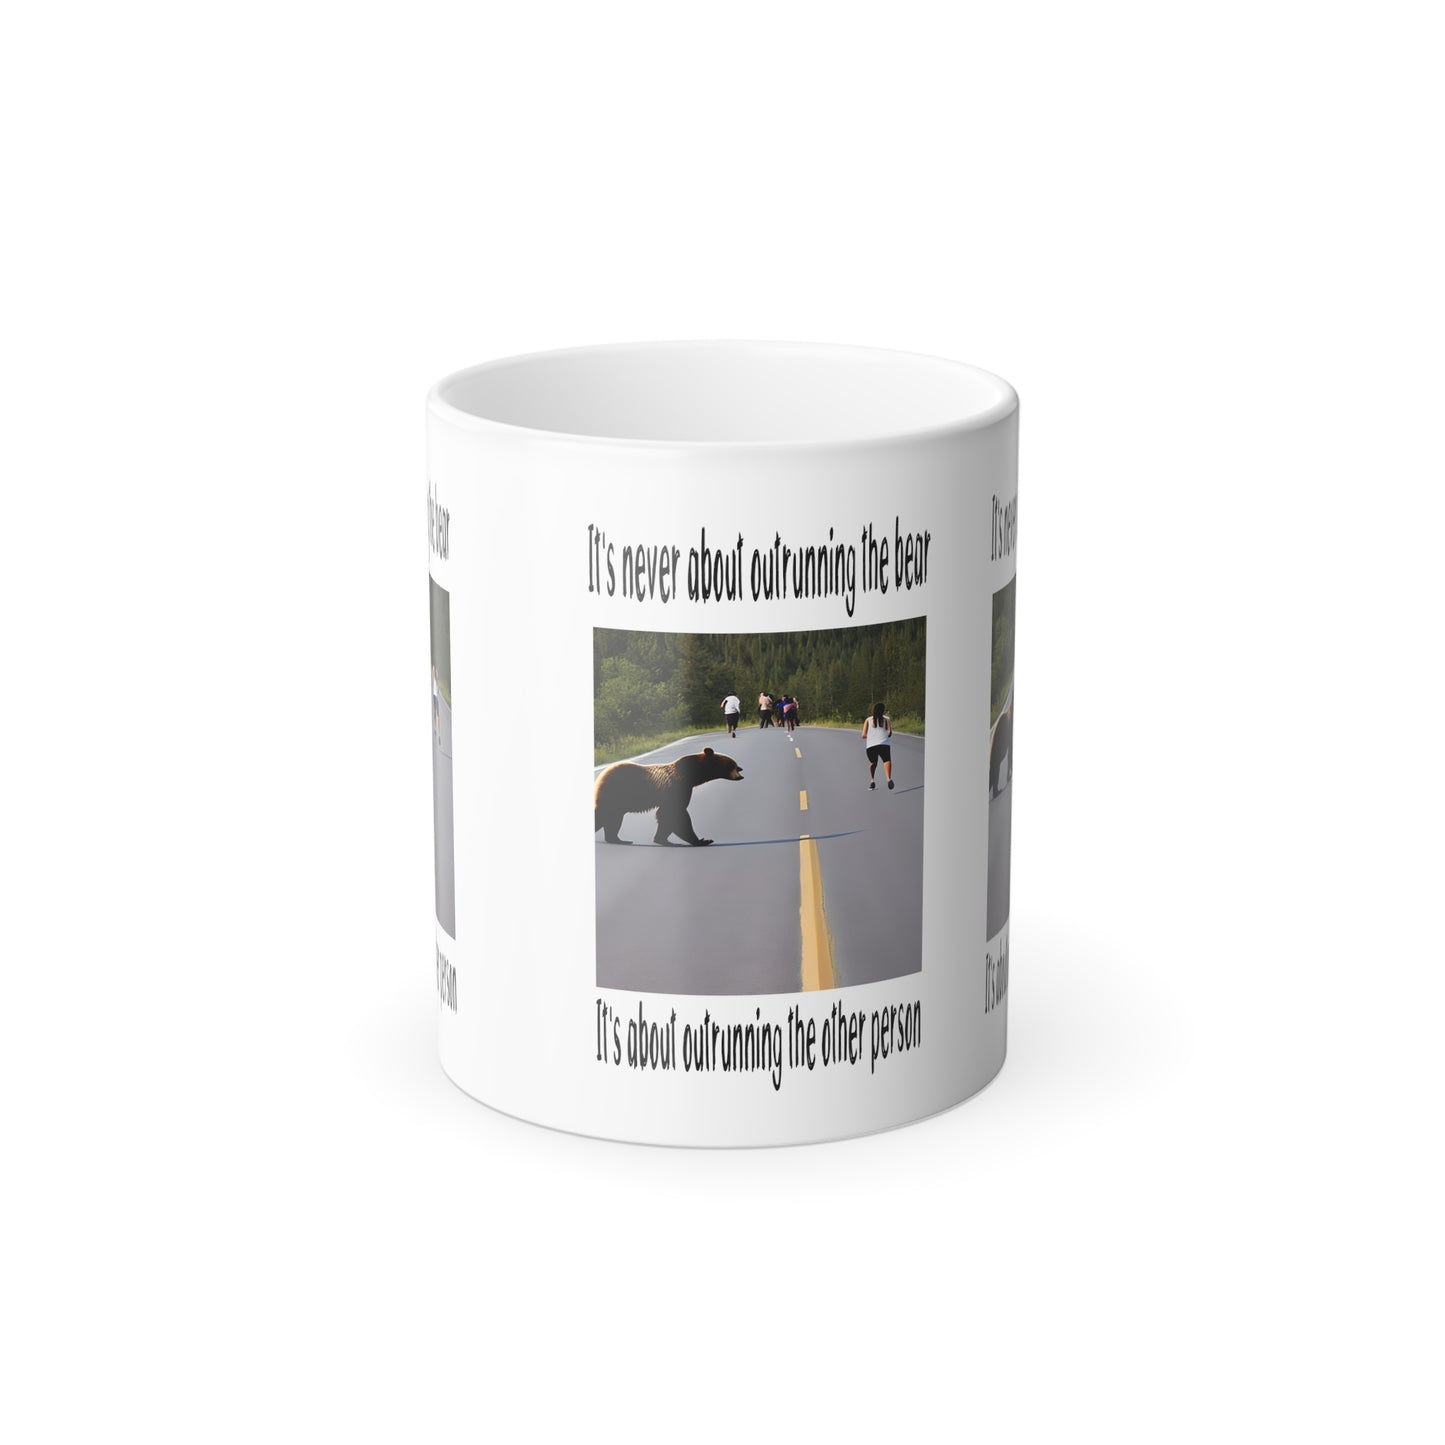 It's Never About Outrunning The Bear- It's About Outrunning The Other Person - Color Morphing Mug, 11oz